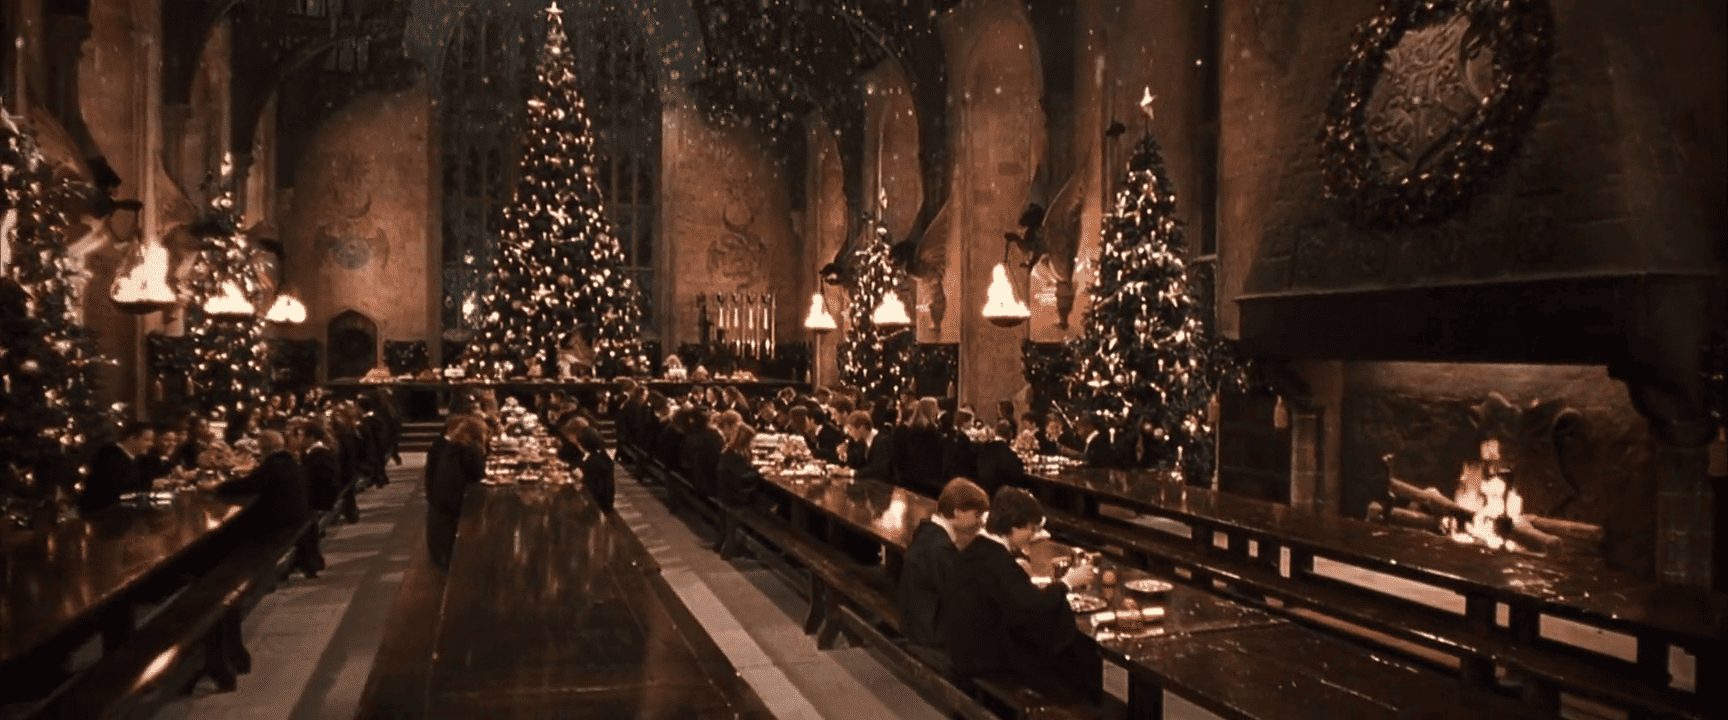 Students sit in a dining hall that’s decorated for Christmas in this image from Warner Bros. Pictures.